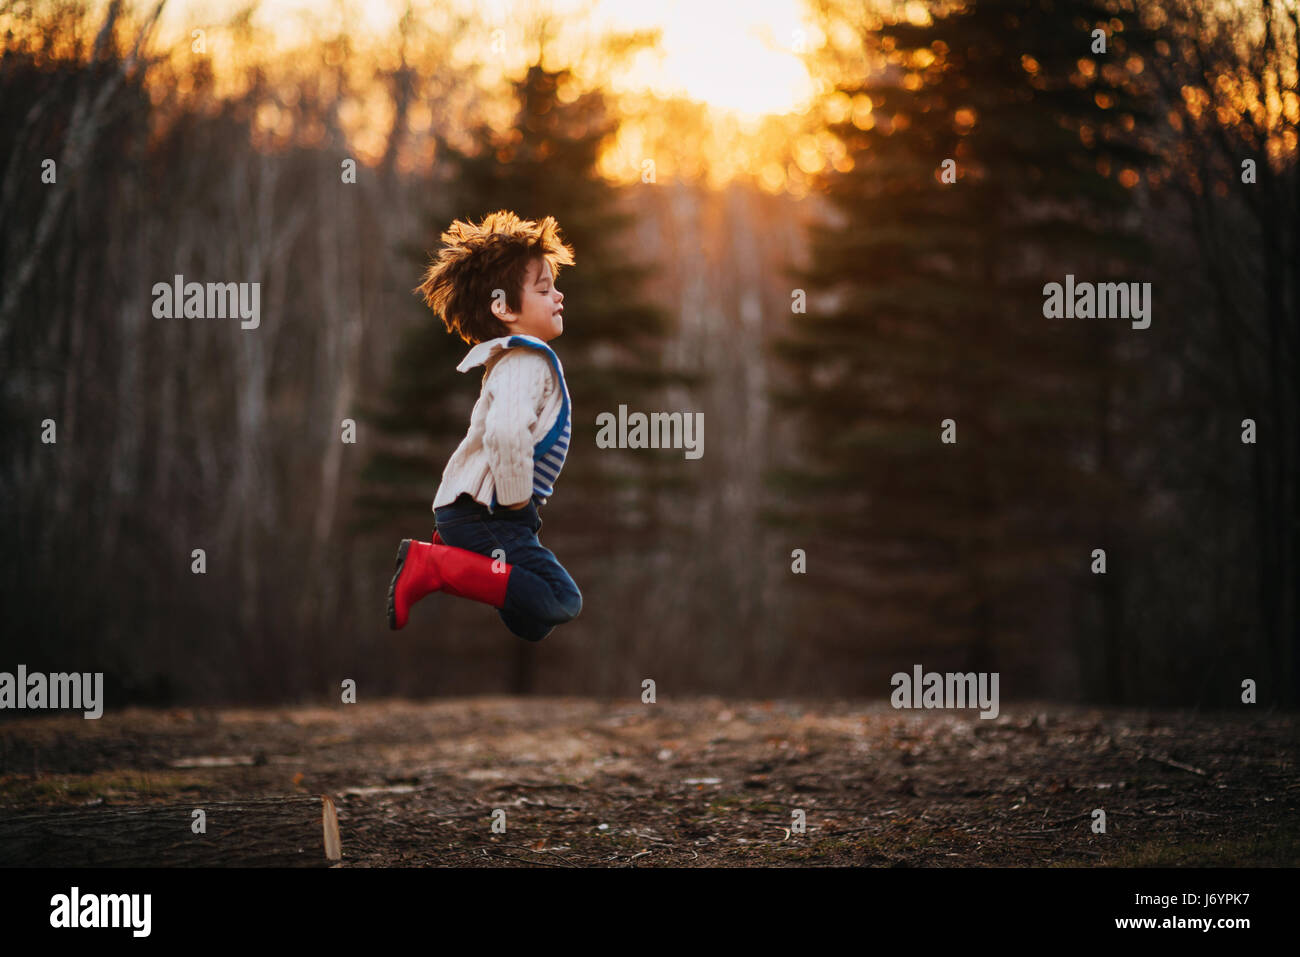 Boy jumping off a log in the forest Stock Photo